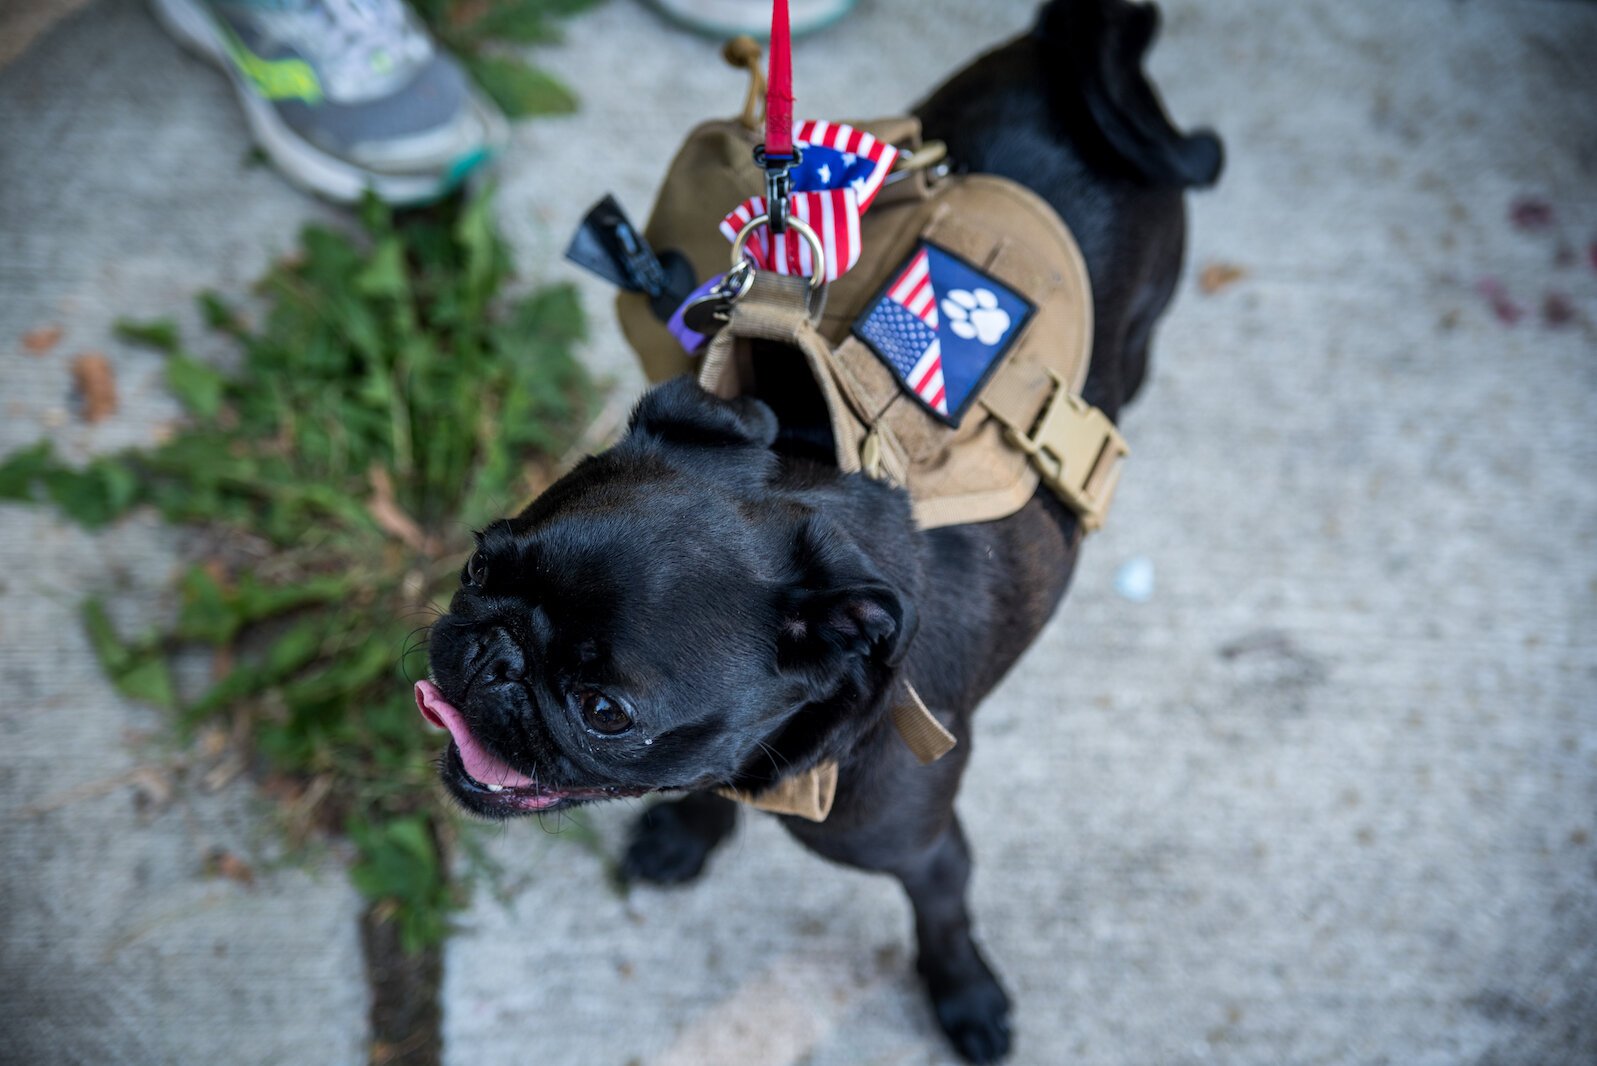 There were dogs that turned out for the celebration of the Edison Neighborhood Celebration of National Night Out 2022. Photo by Fran Dwight.